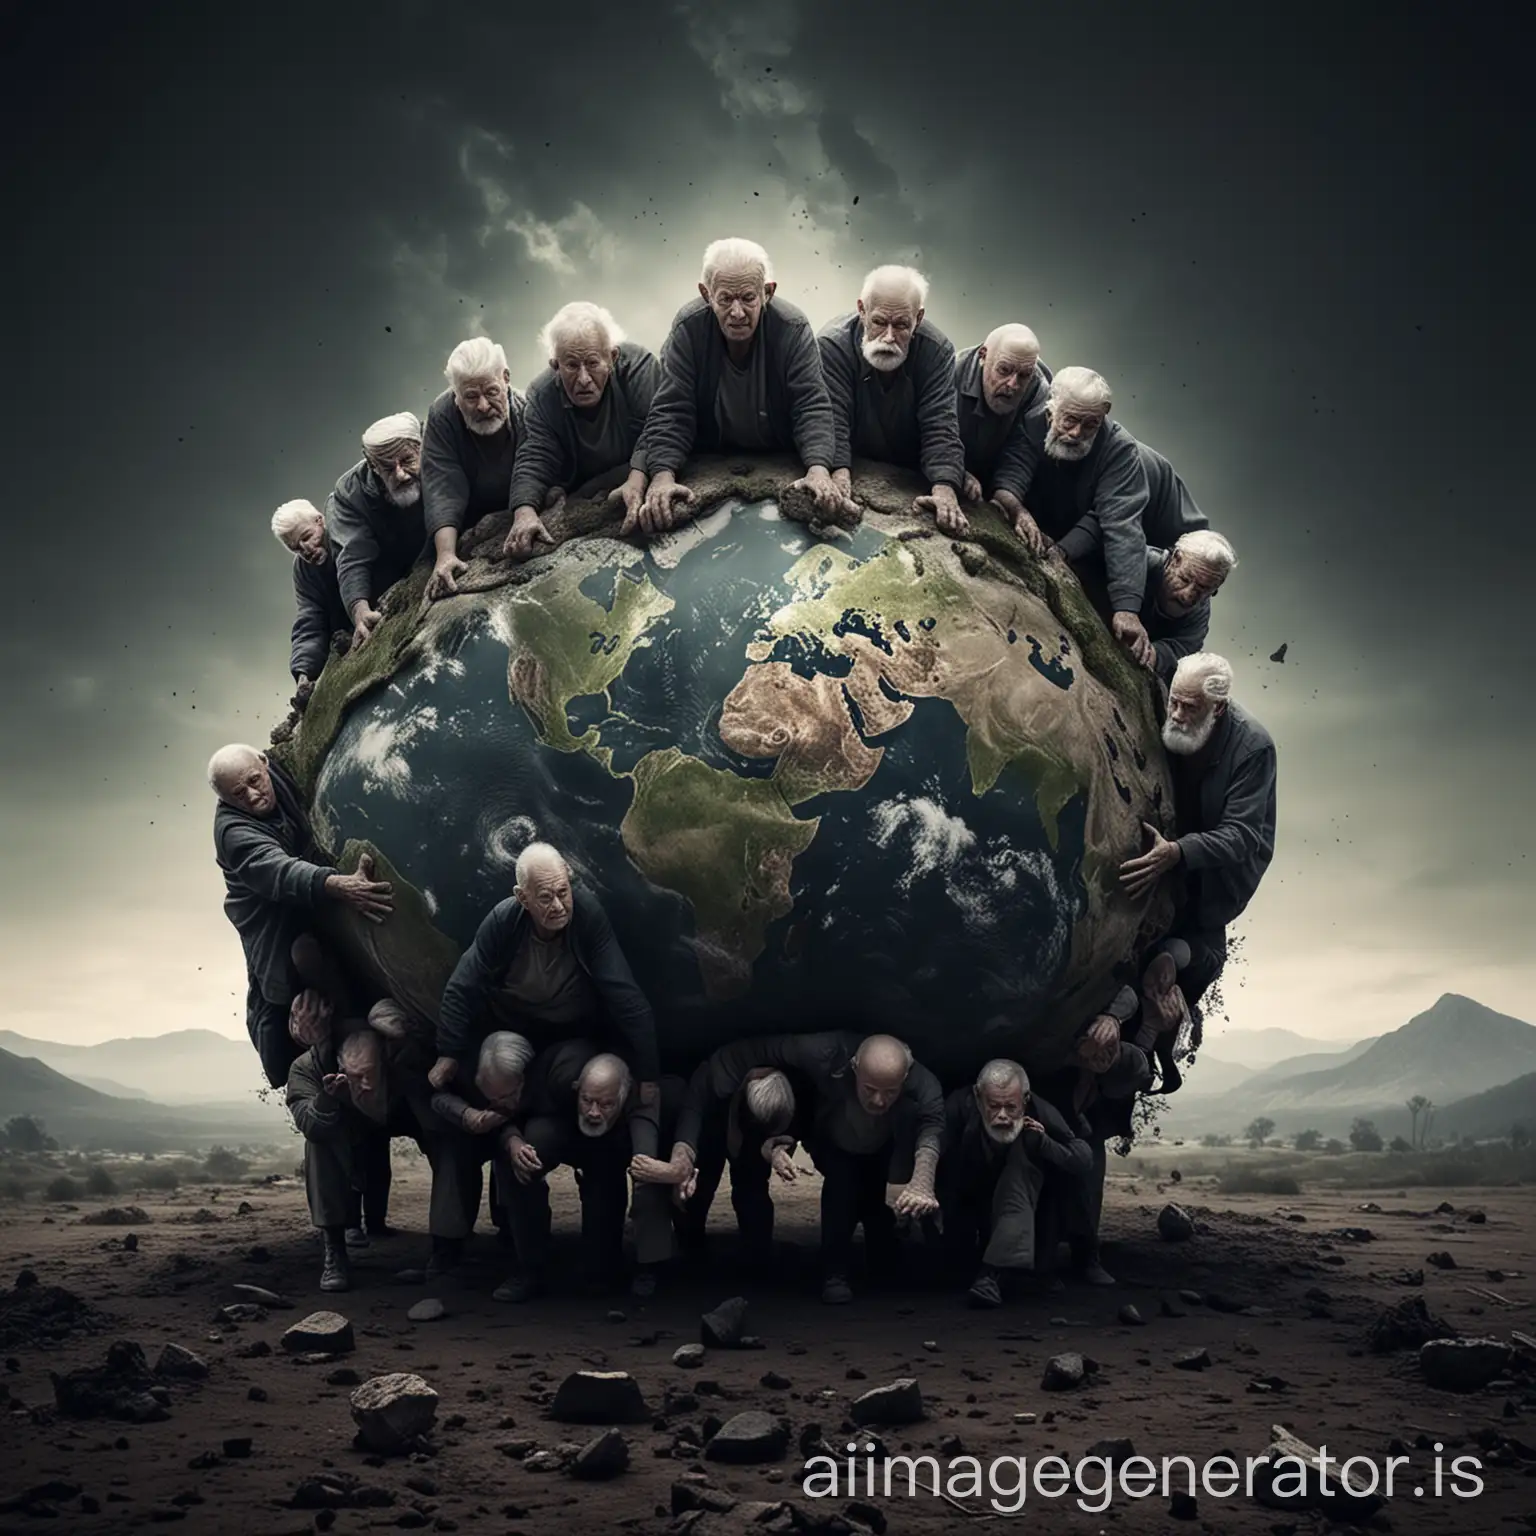 multiple old people lifting the earth on their backs, struggling, dark, evil, realistic, ONE earth